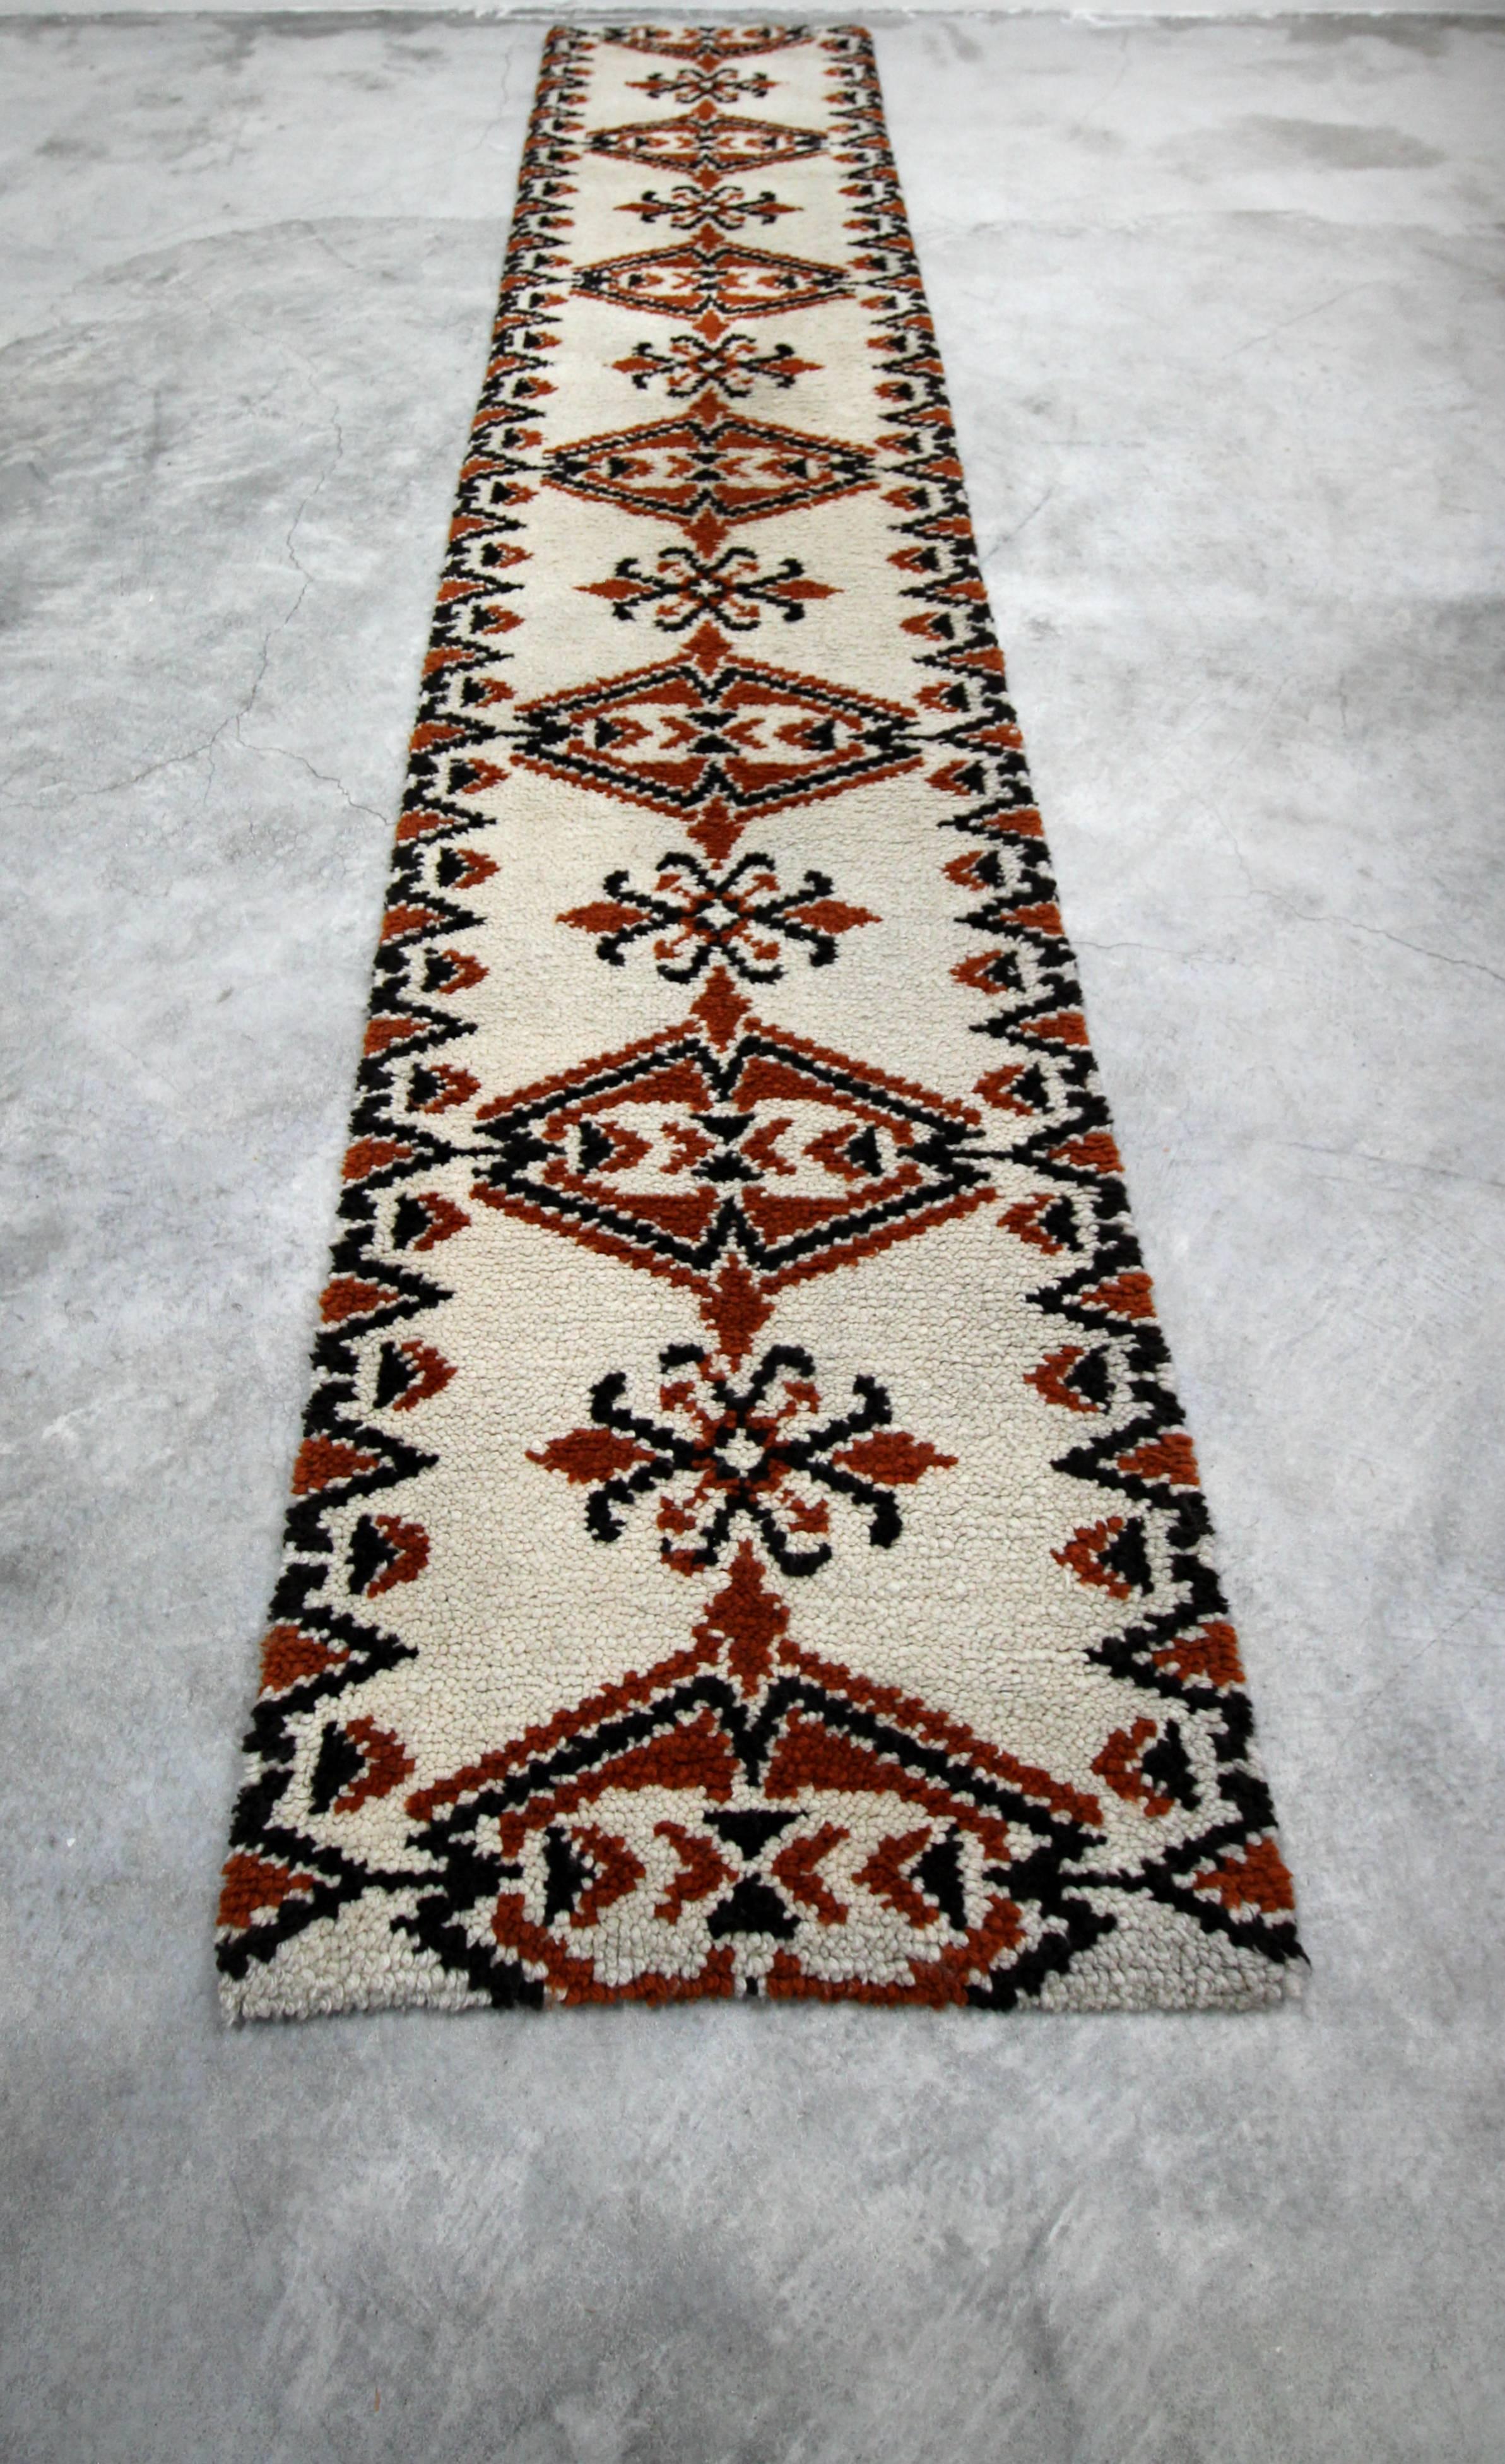 You are looking at a Classic example of a Scandinavian Rya rug. Purchased from the original owner who purchased it from Bullock's Department store in the 1960s. The rug is a nice neutral palette of cream, rust and brown. It measures 129